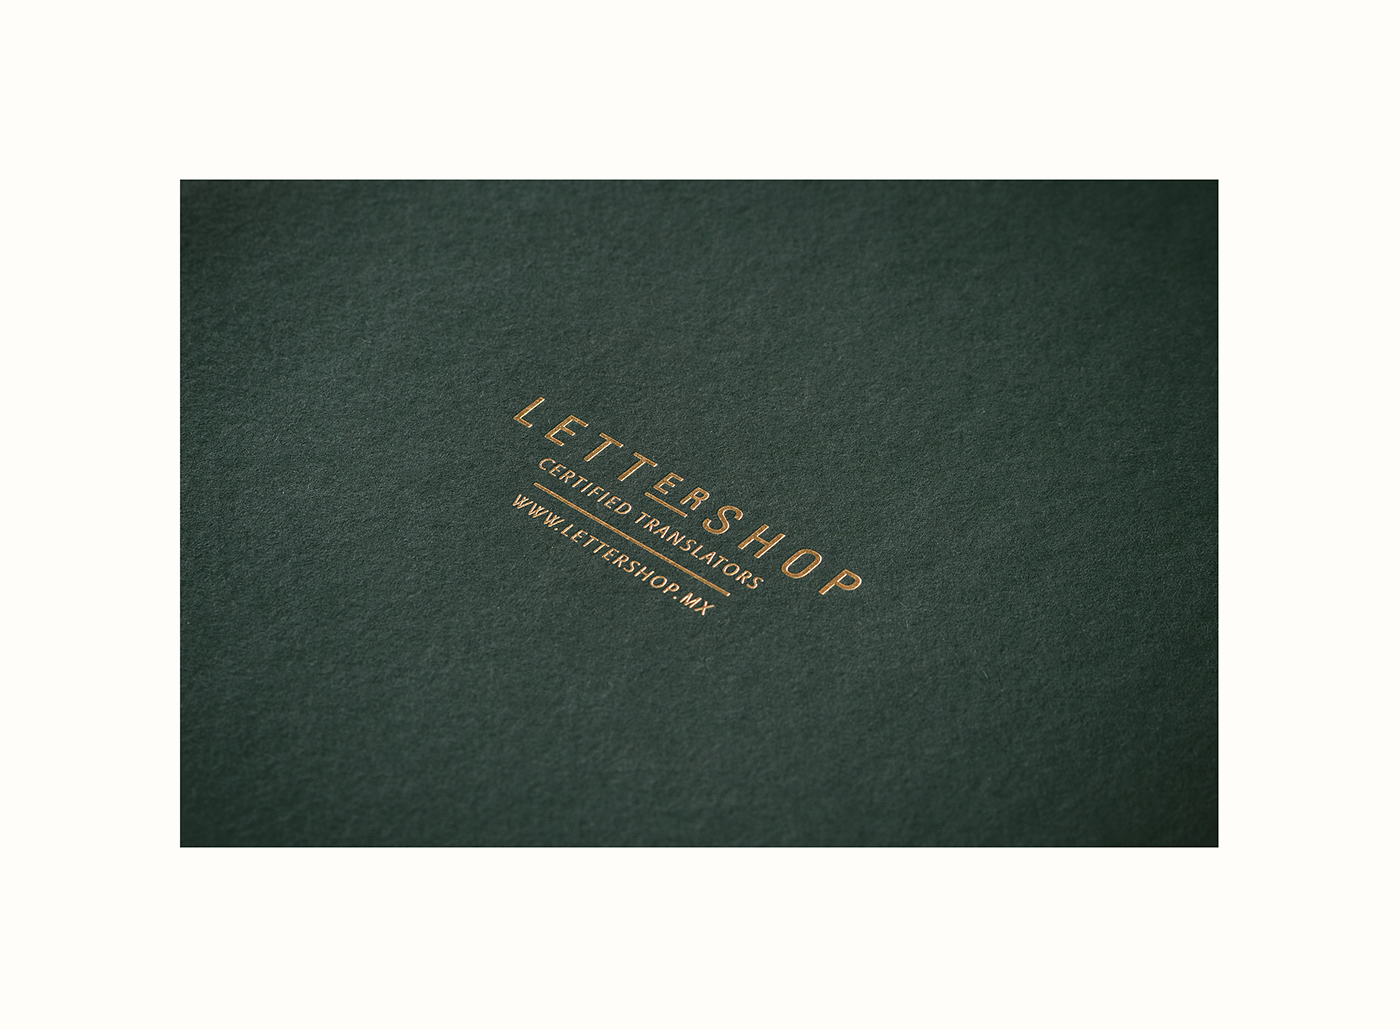 branding  letters translate Classic books marca mexico vintage words library